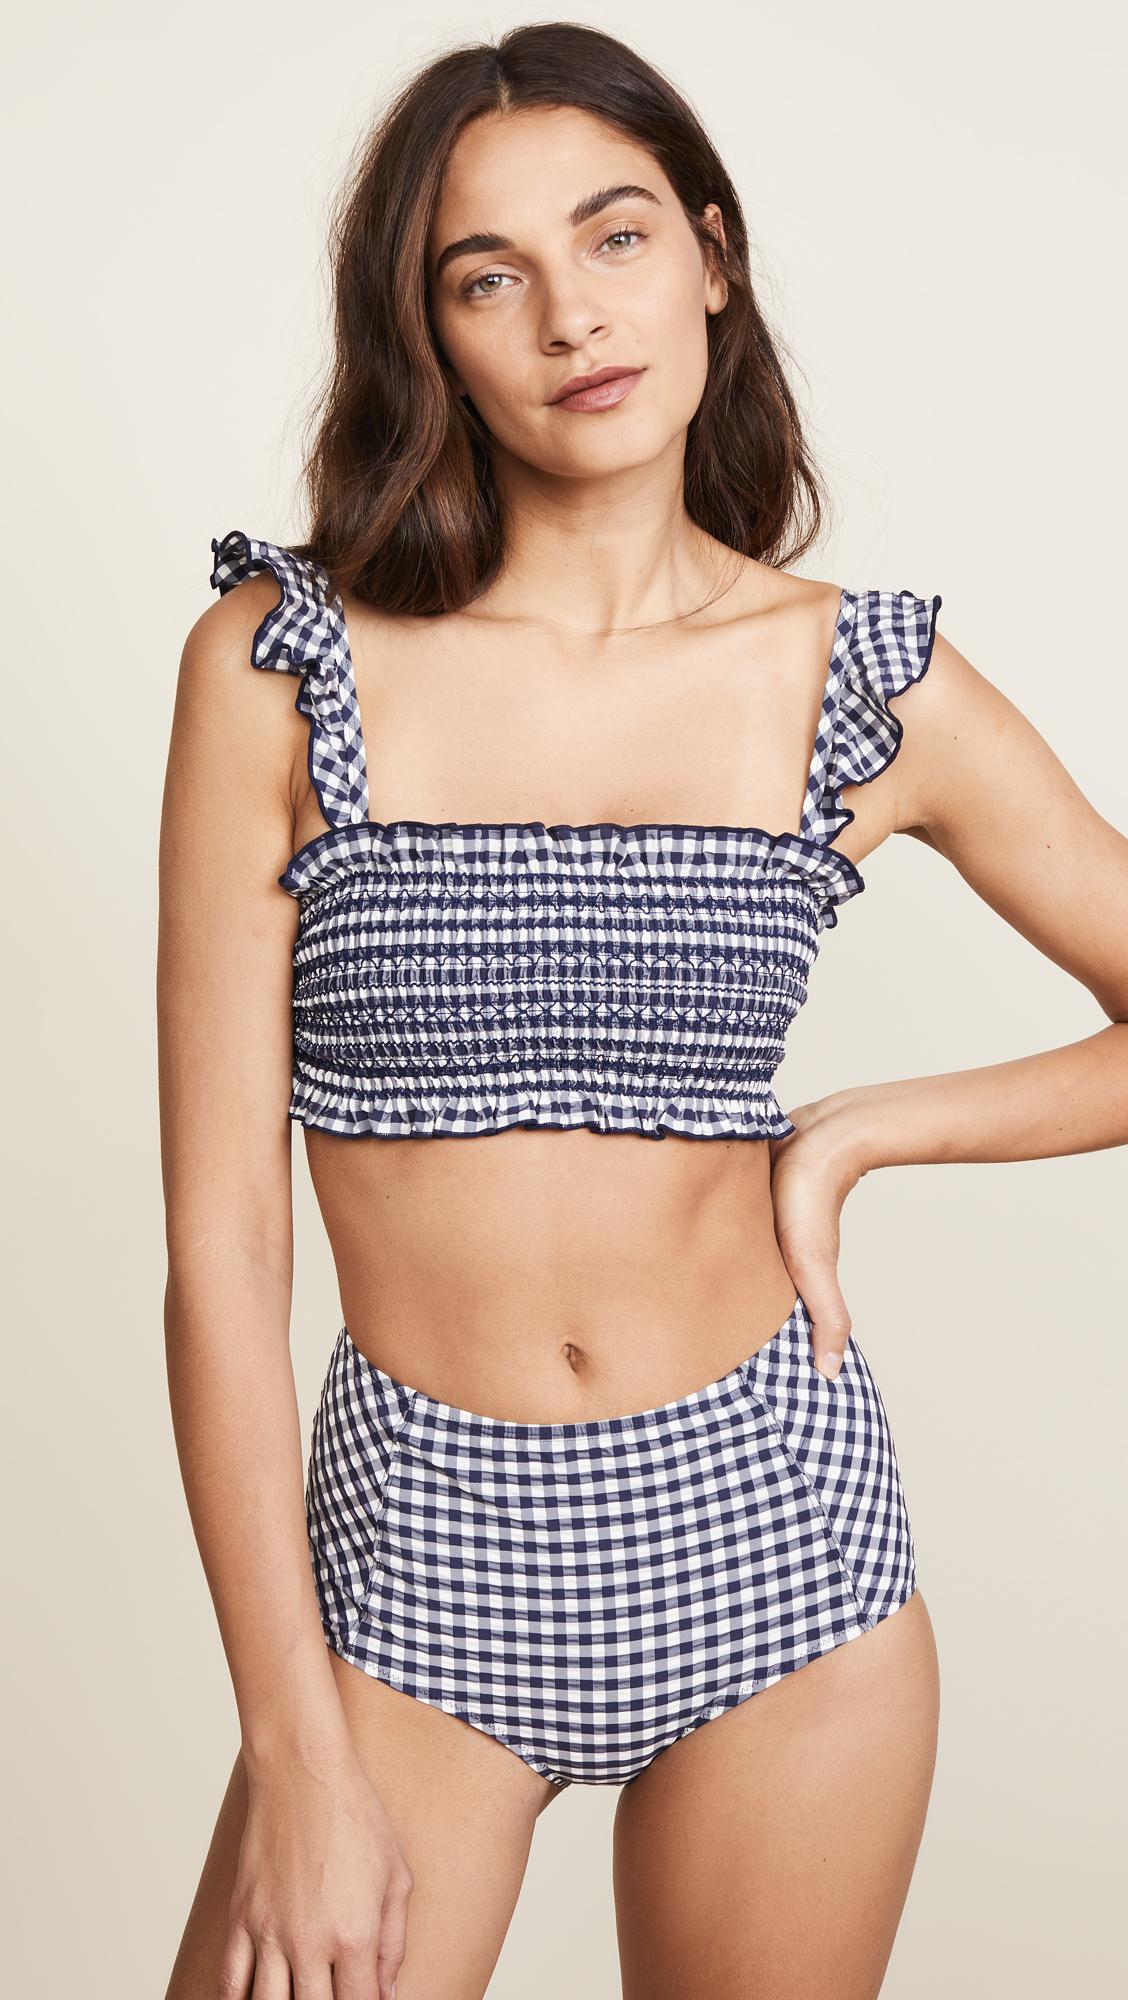 Tory Burch Gingham Costa Ruffle Top + Bottom - Weekly Finds featured by North Carolina style blogger, Glitter, Inc.